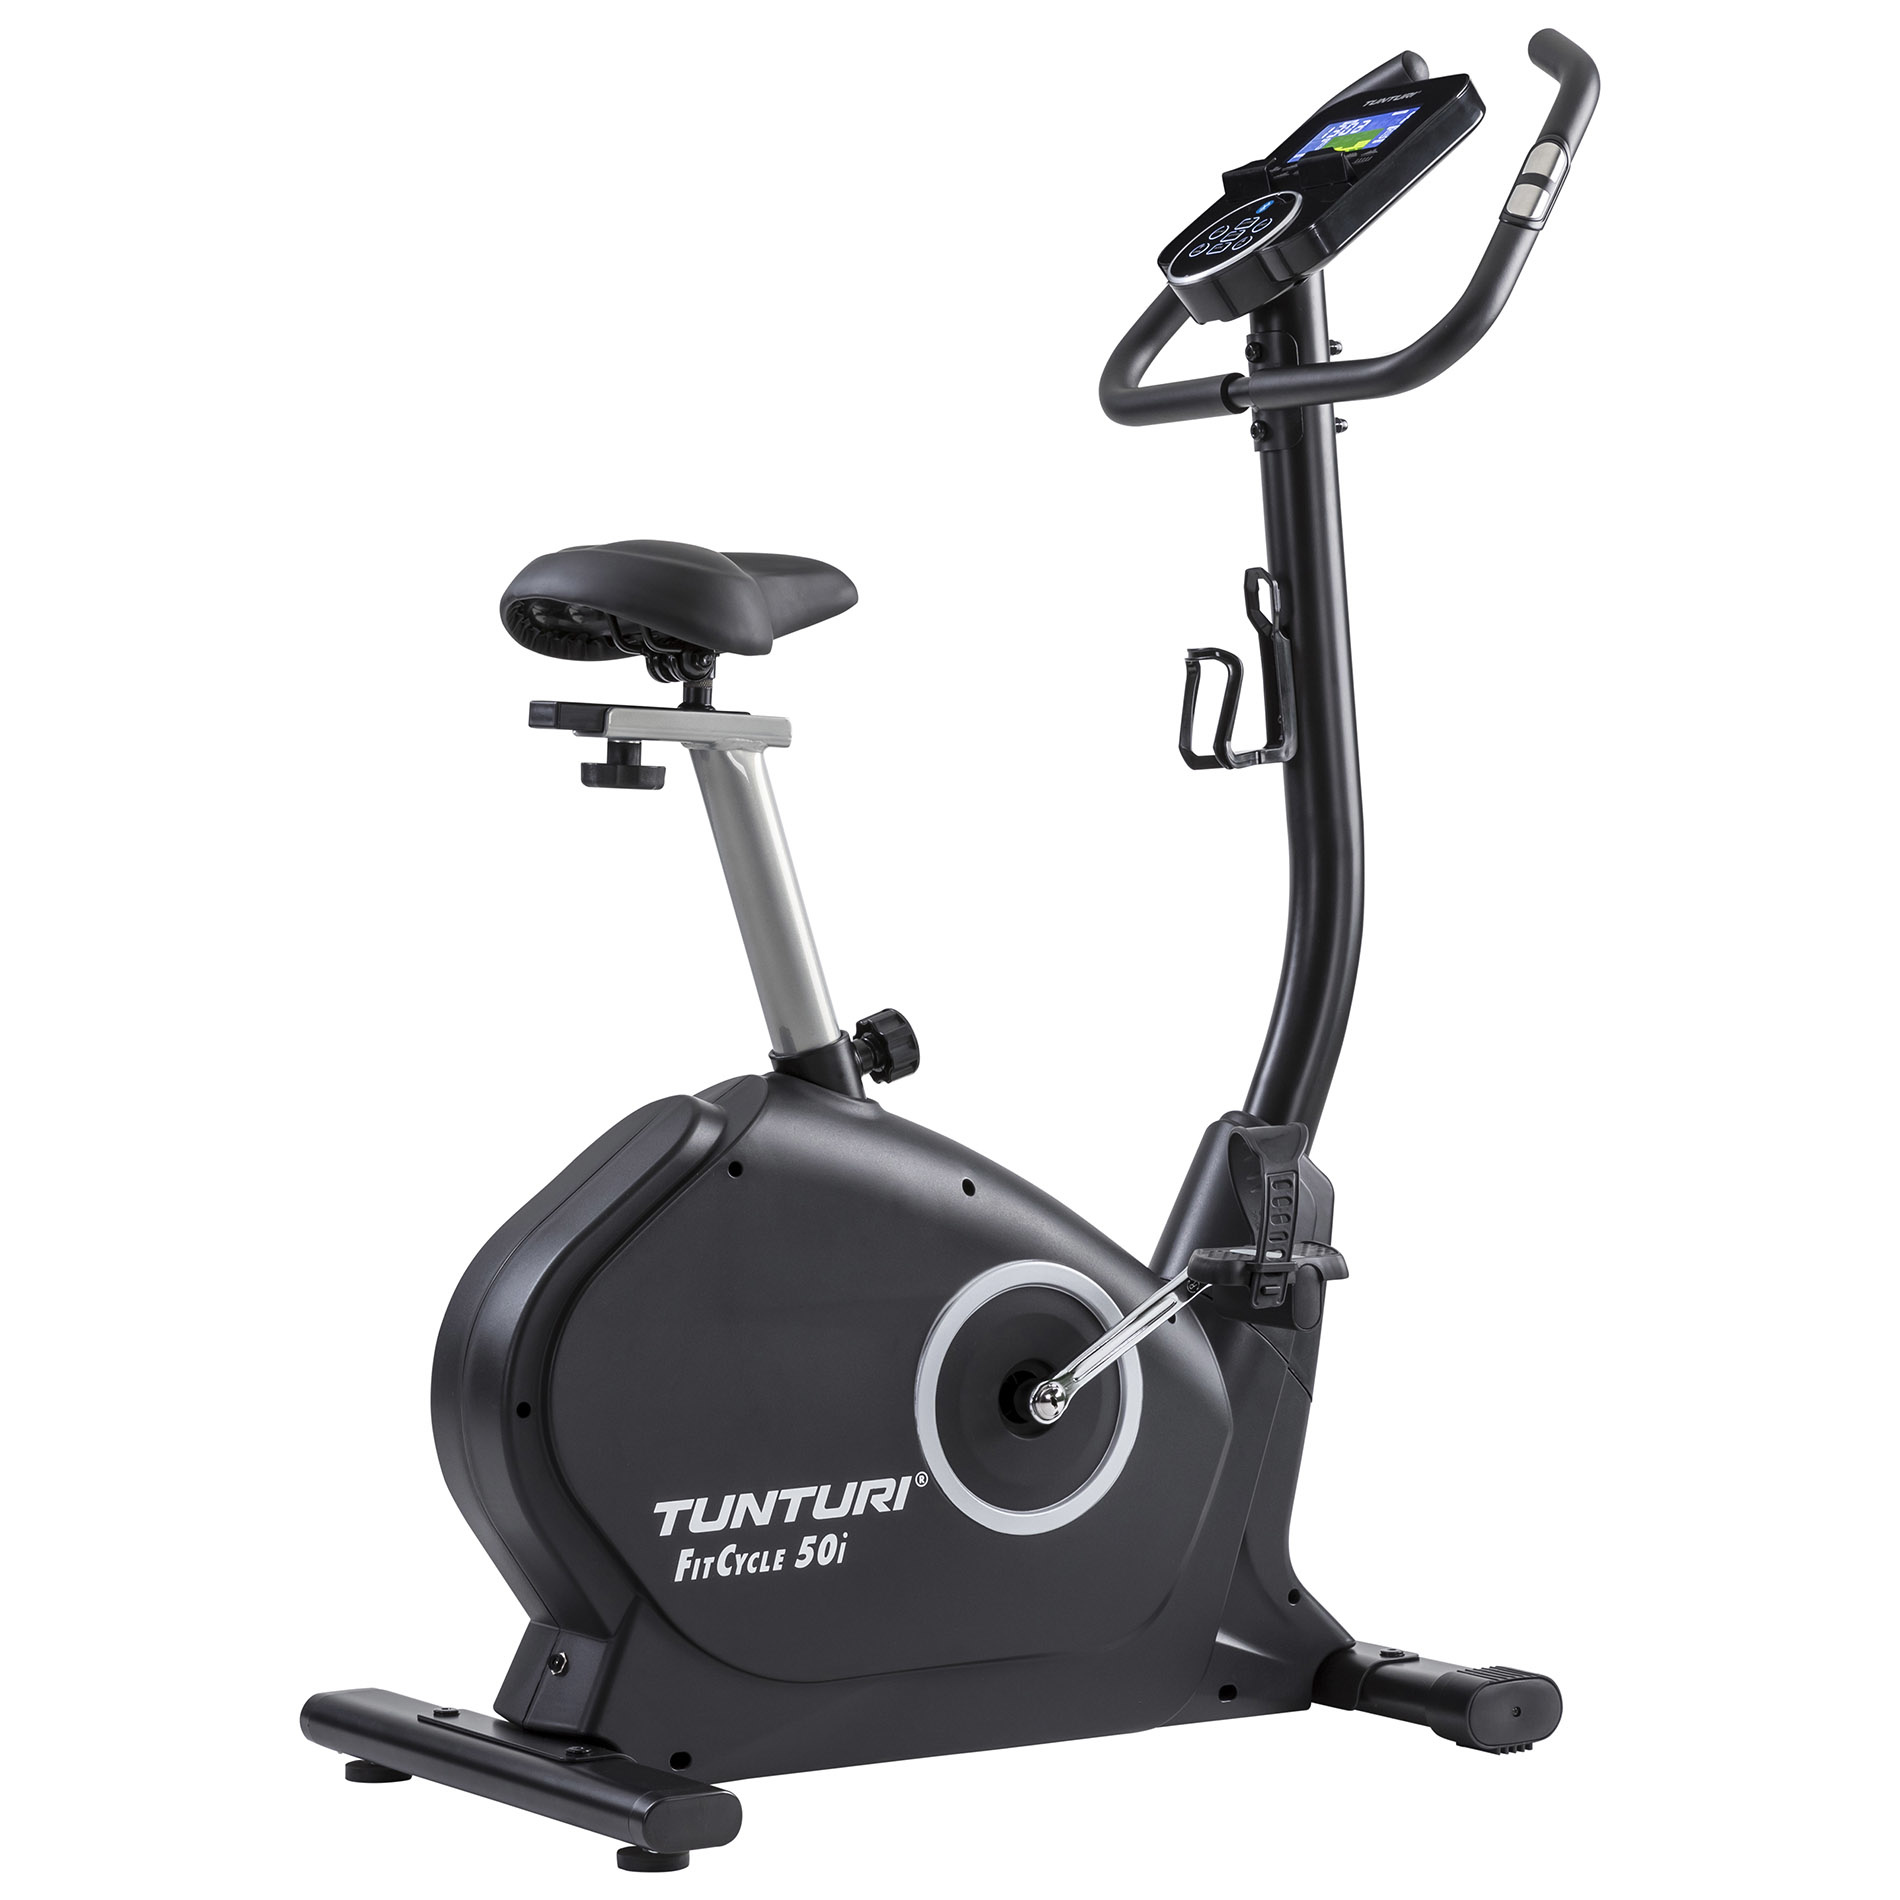 Hometrainer FitCycle 50i - Fitness